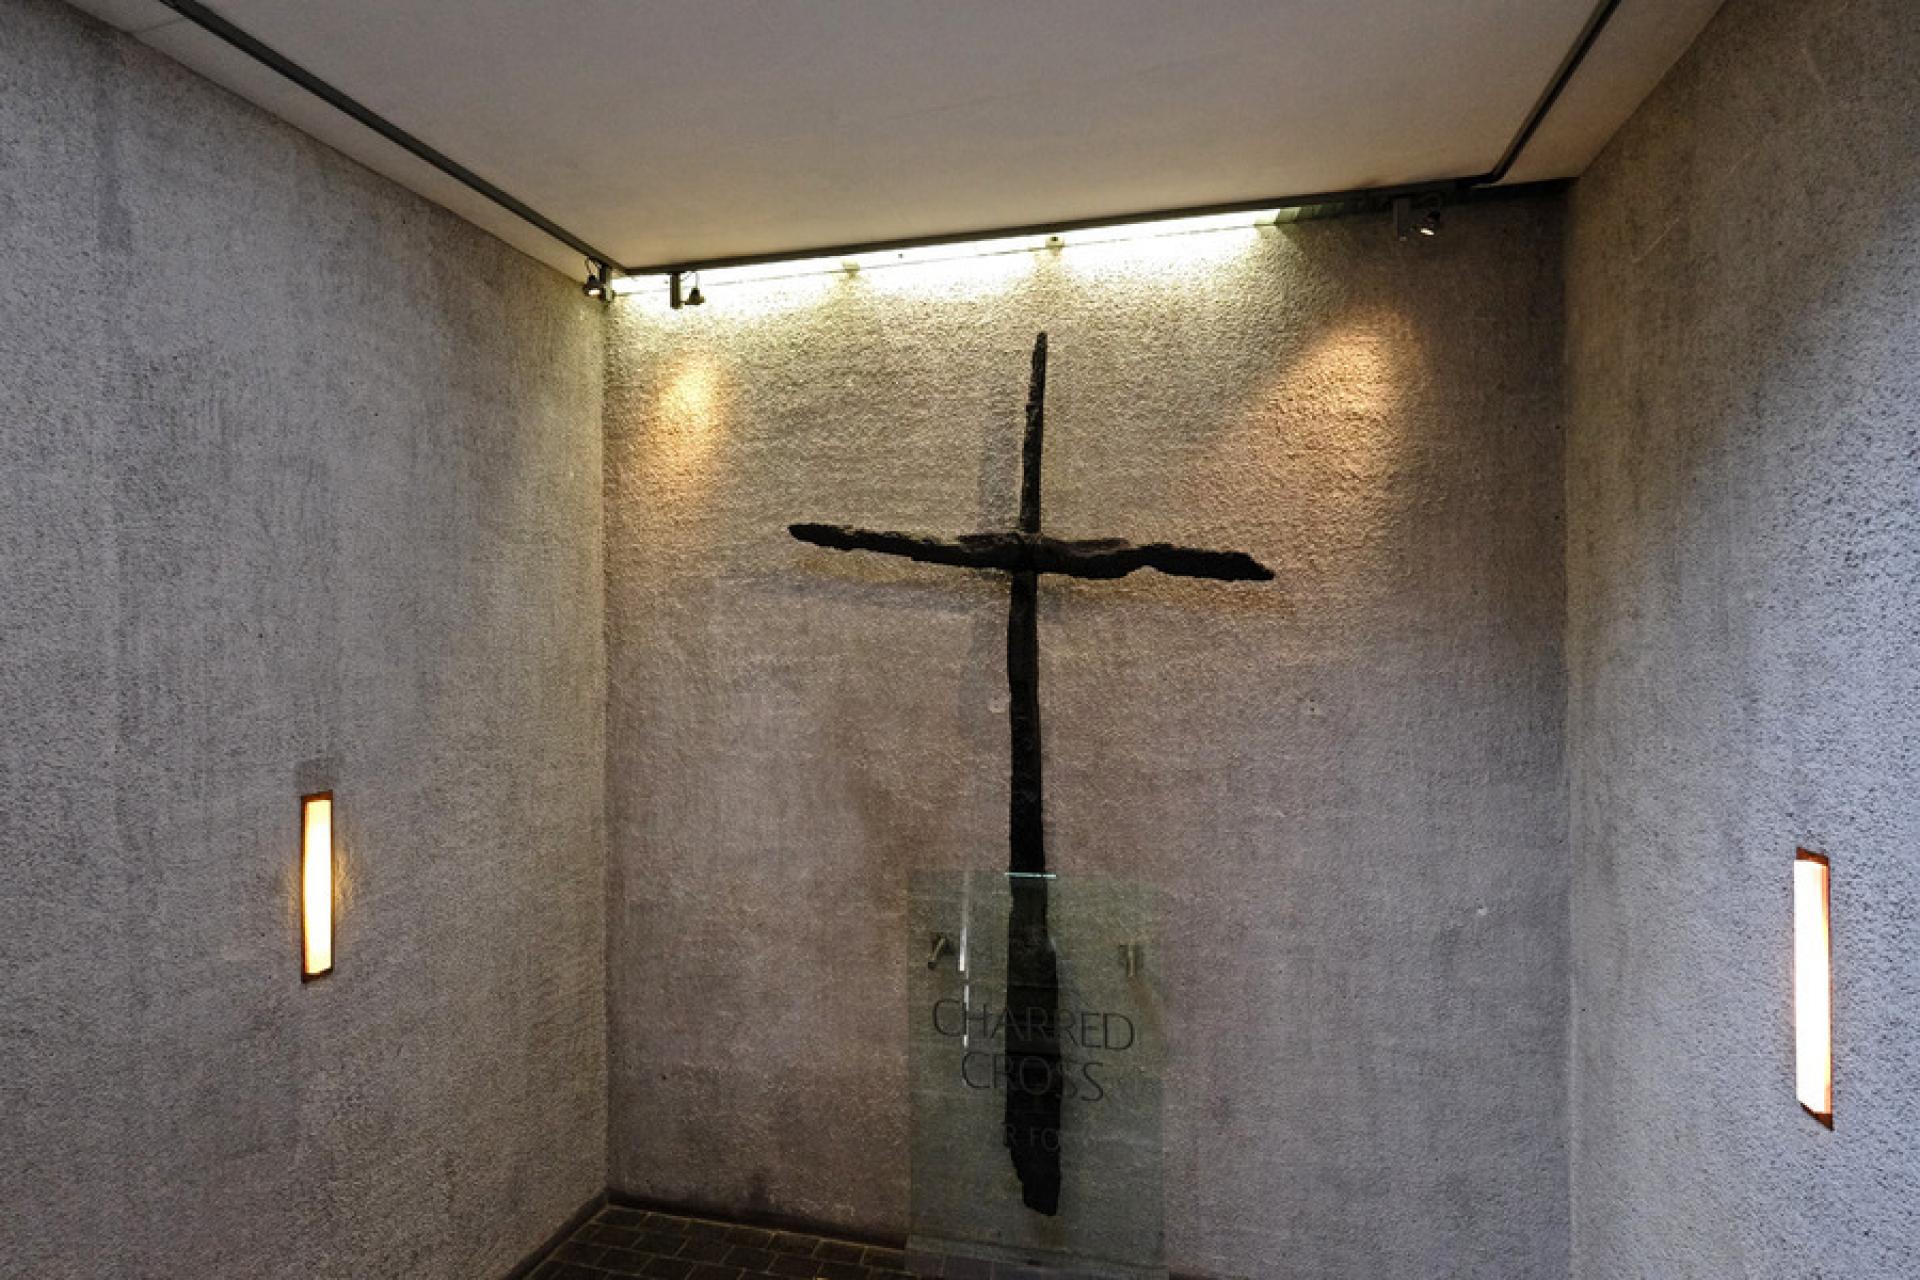 The Charred Cross emphasize the reconciliation theme. | Photo by Ross Nesbitt